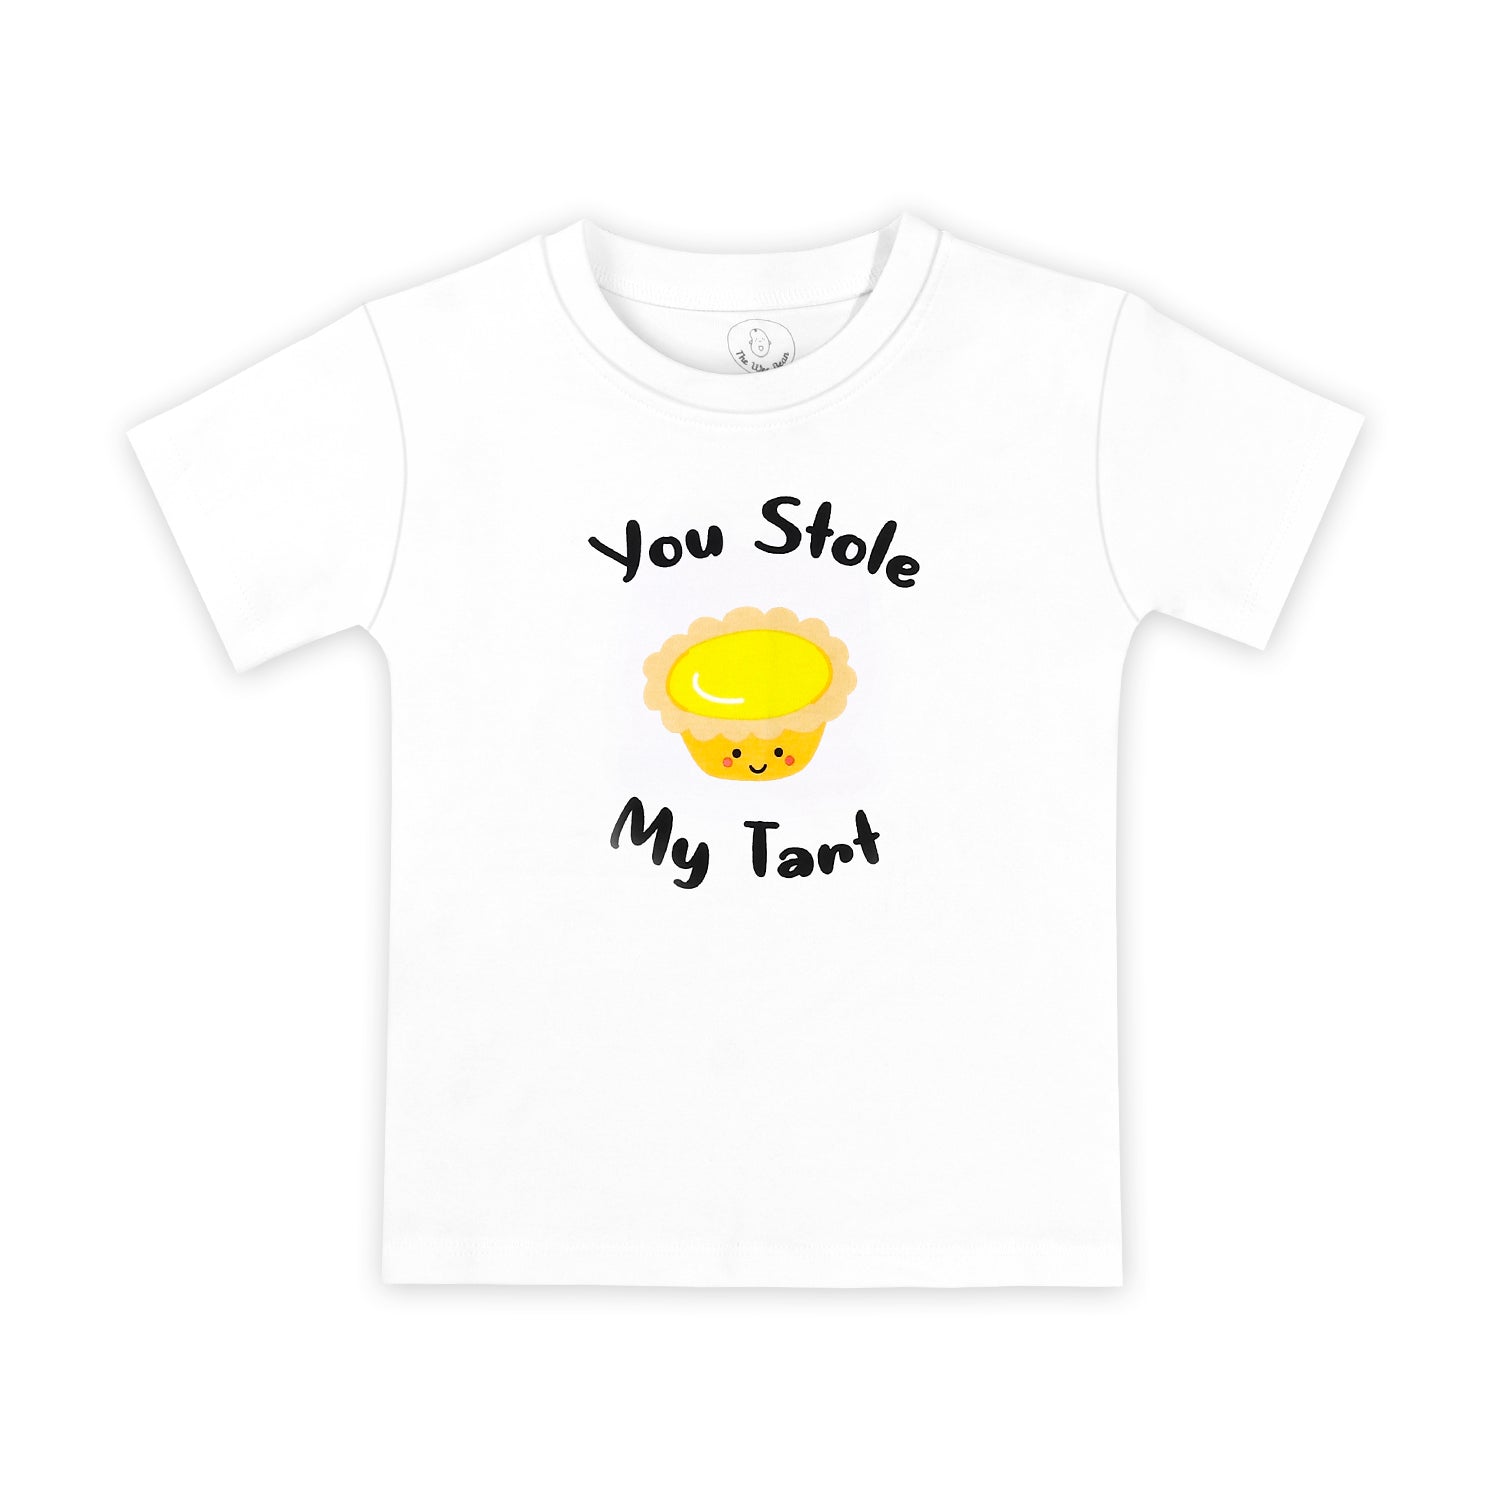 the wee bean organic cotton mommy and me matching kids tee t-shirt in egg tart